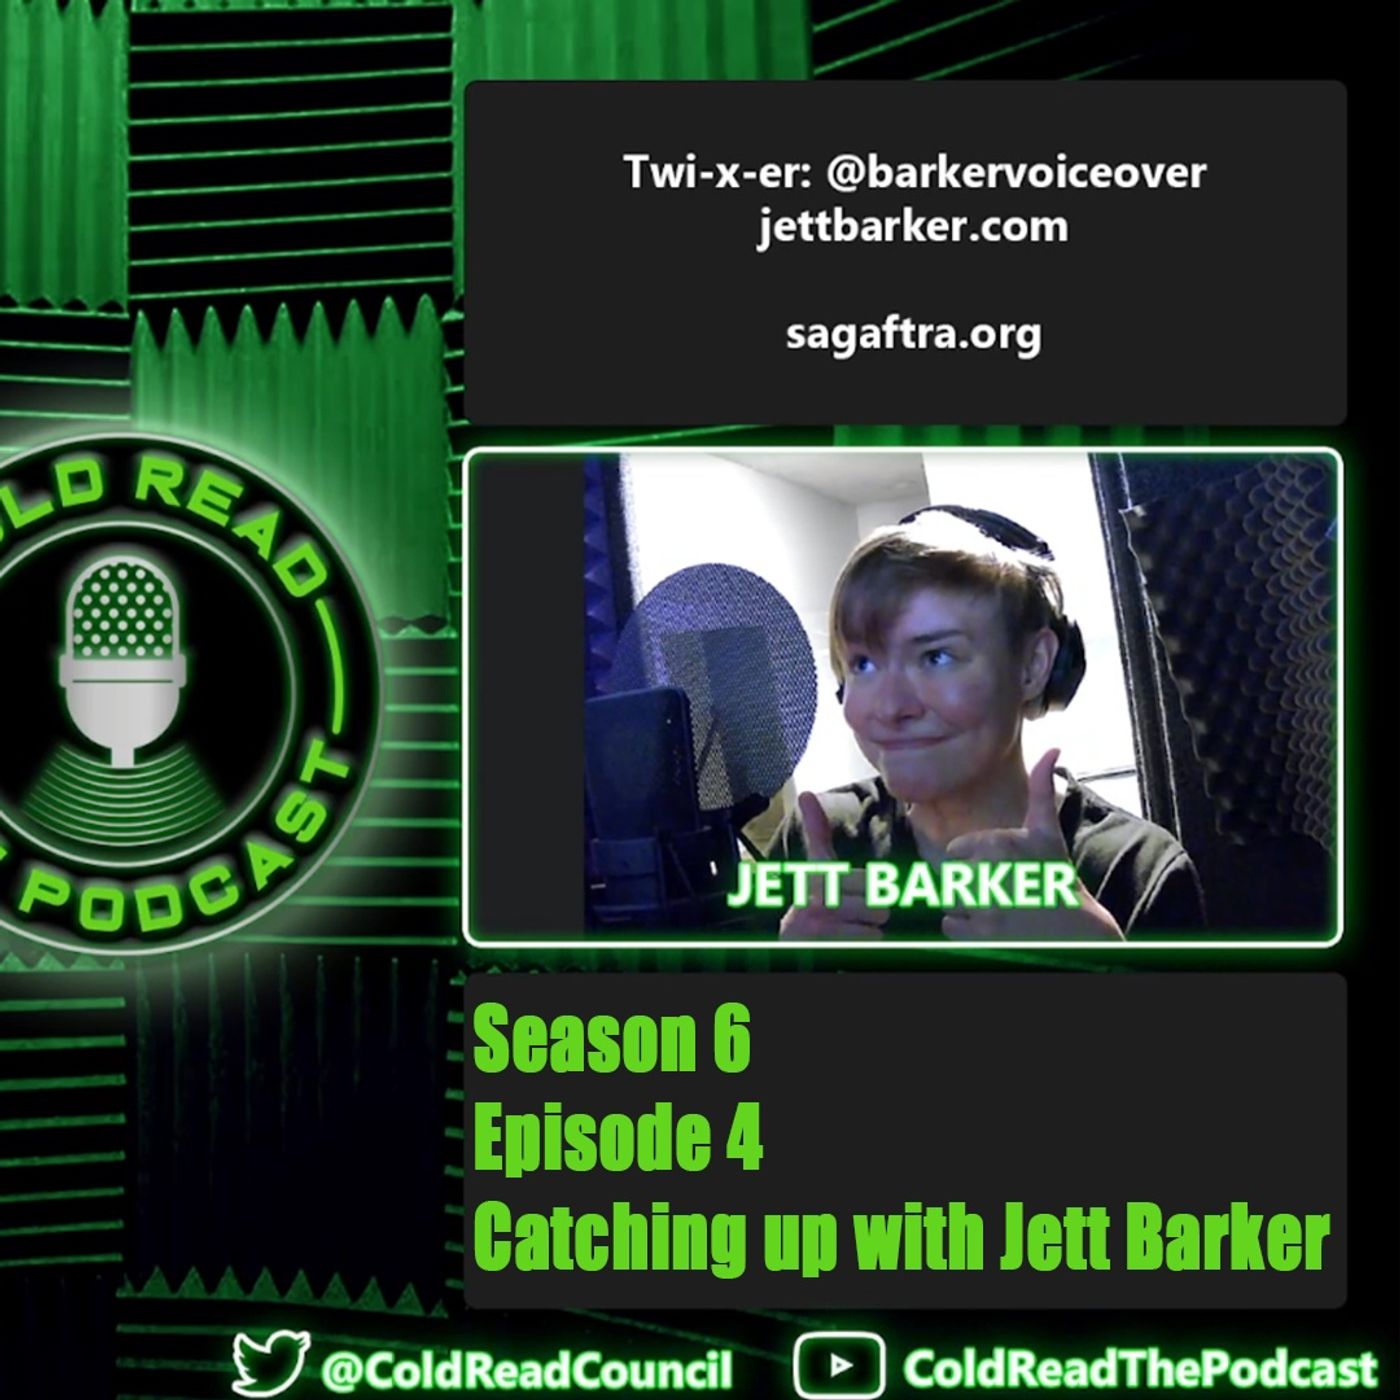 Catching up with Jett Barker